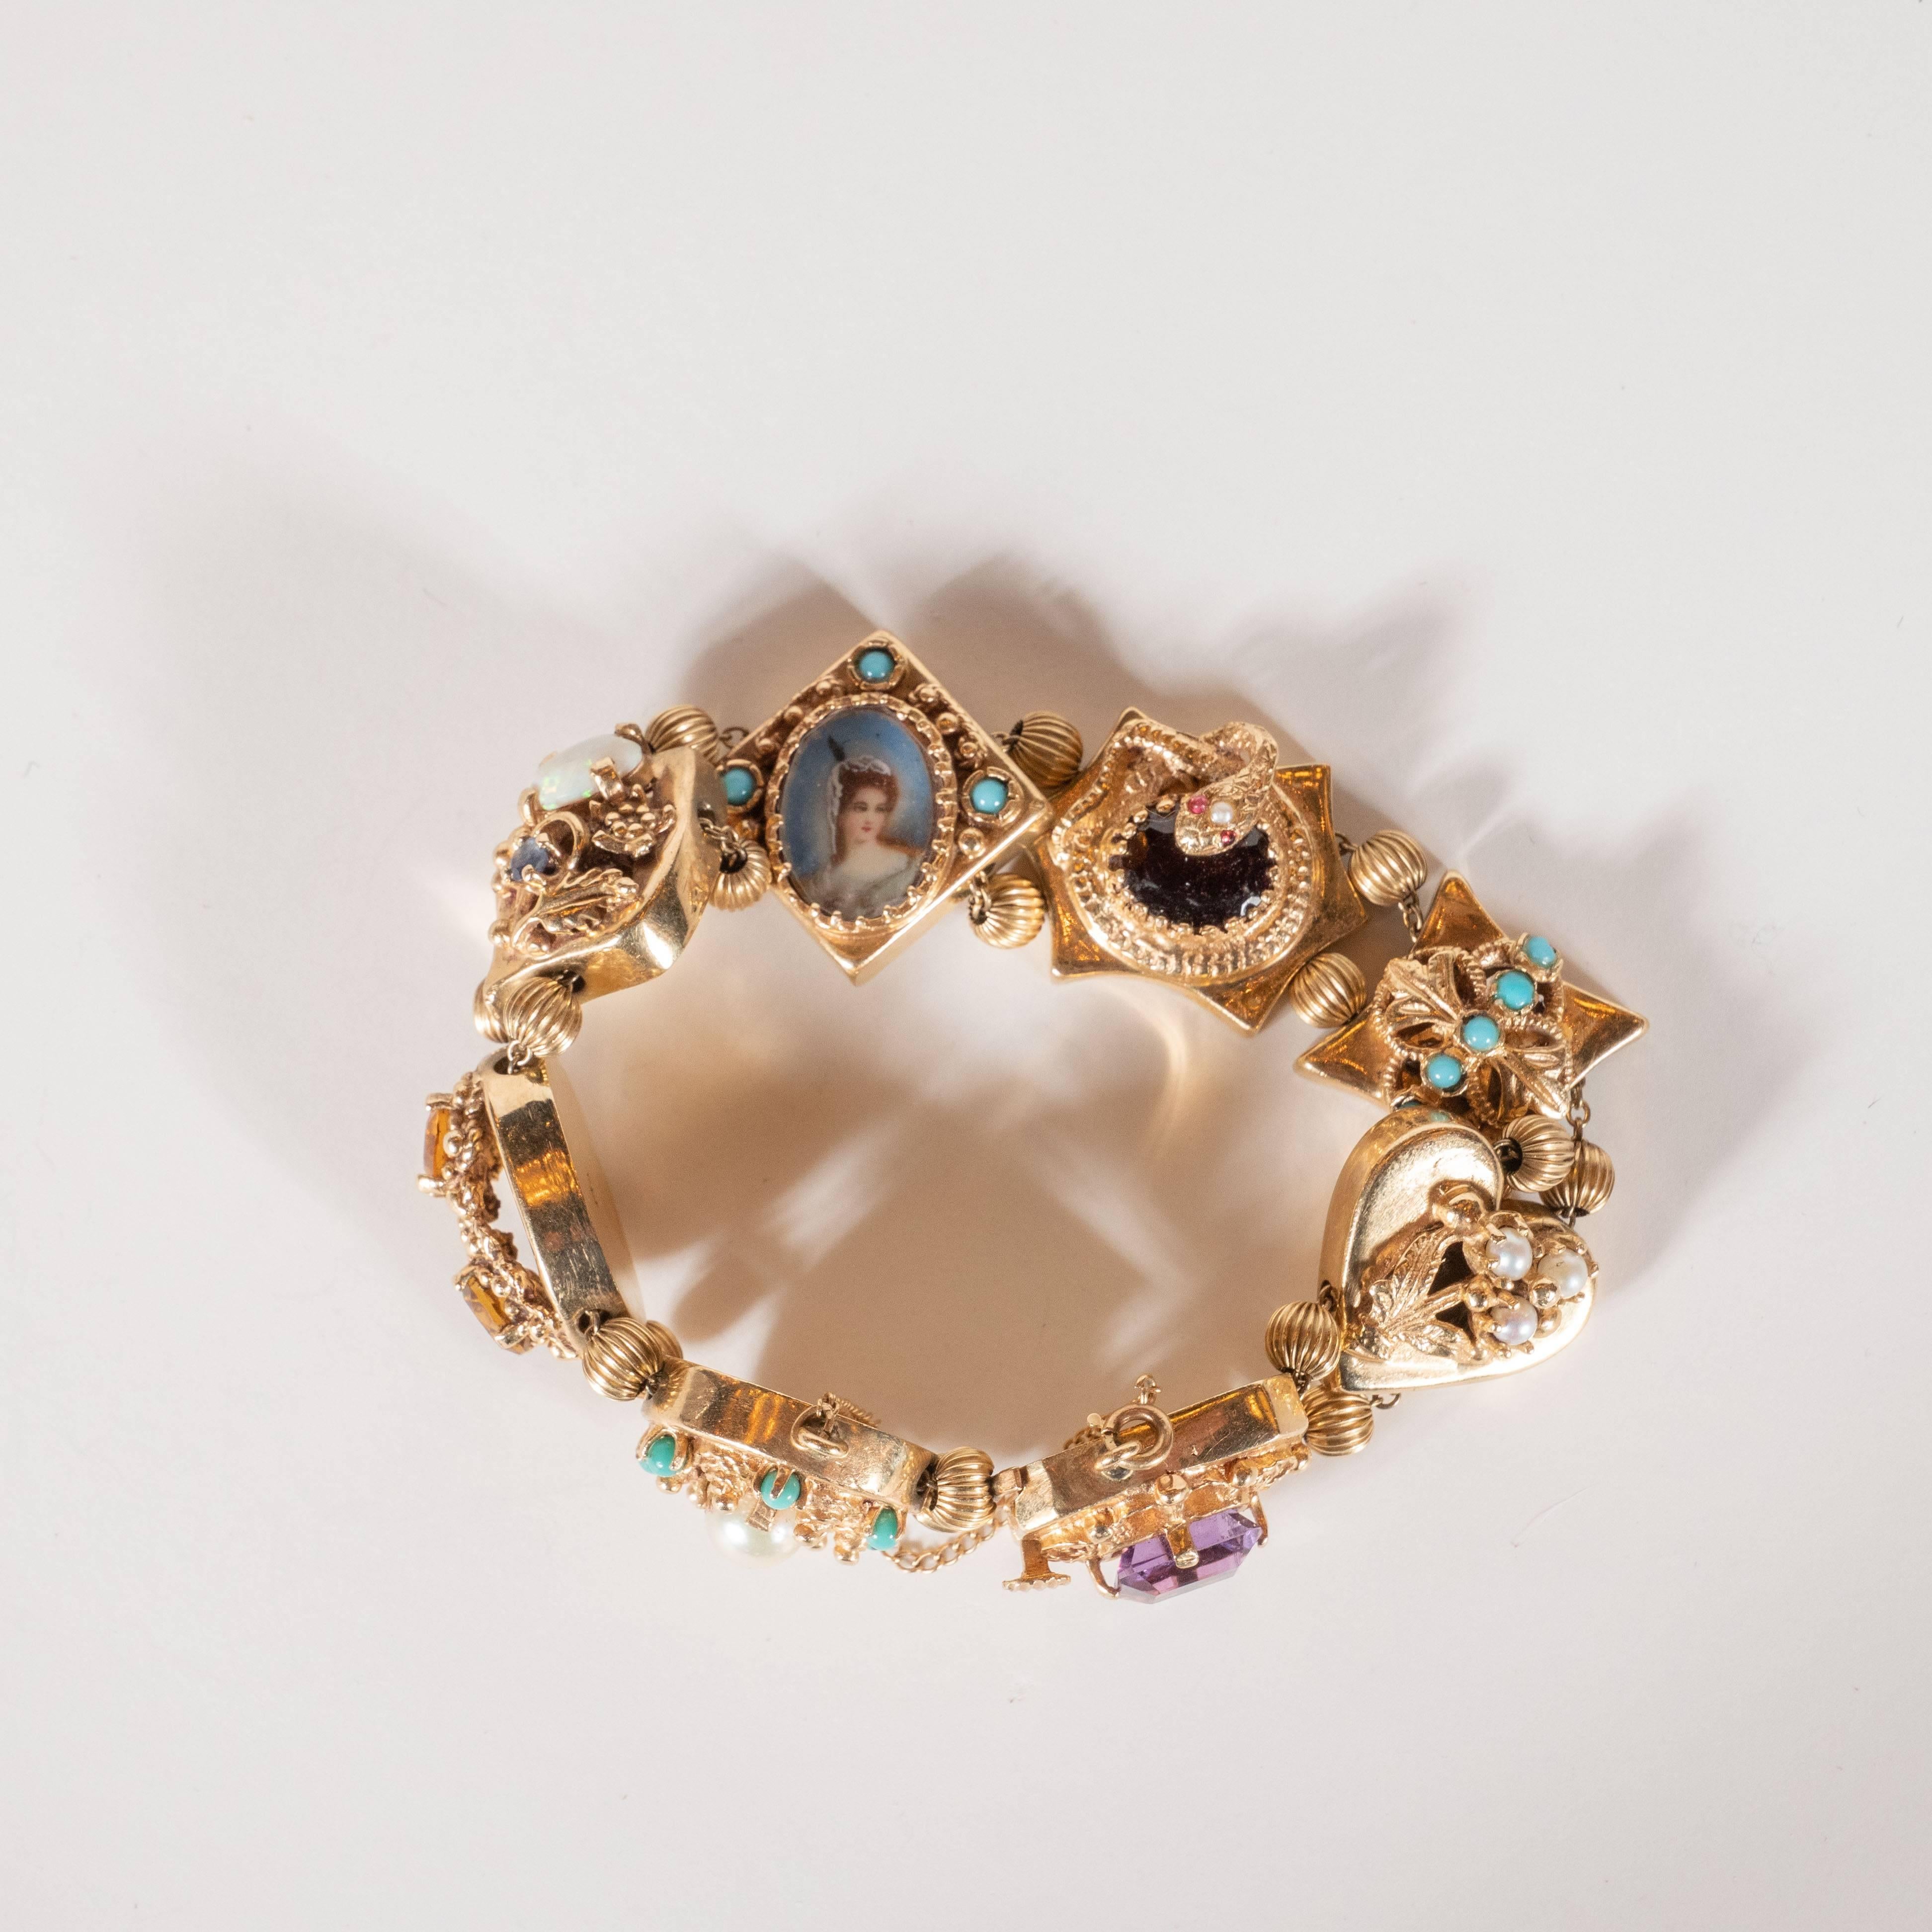 1940s Gold Slide Bracelet with Citrine, Sapphire, Rubies, Garnets and Pearls 1